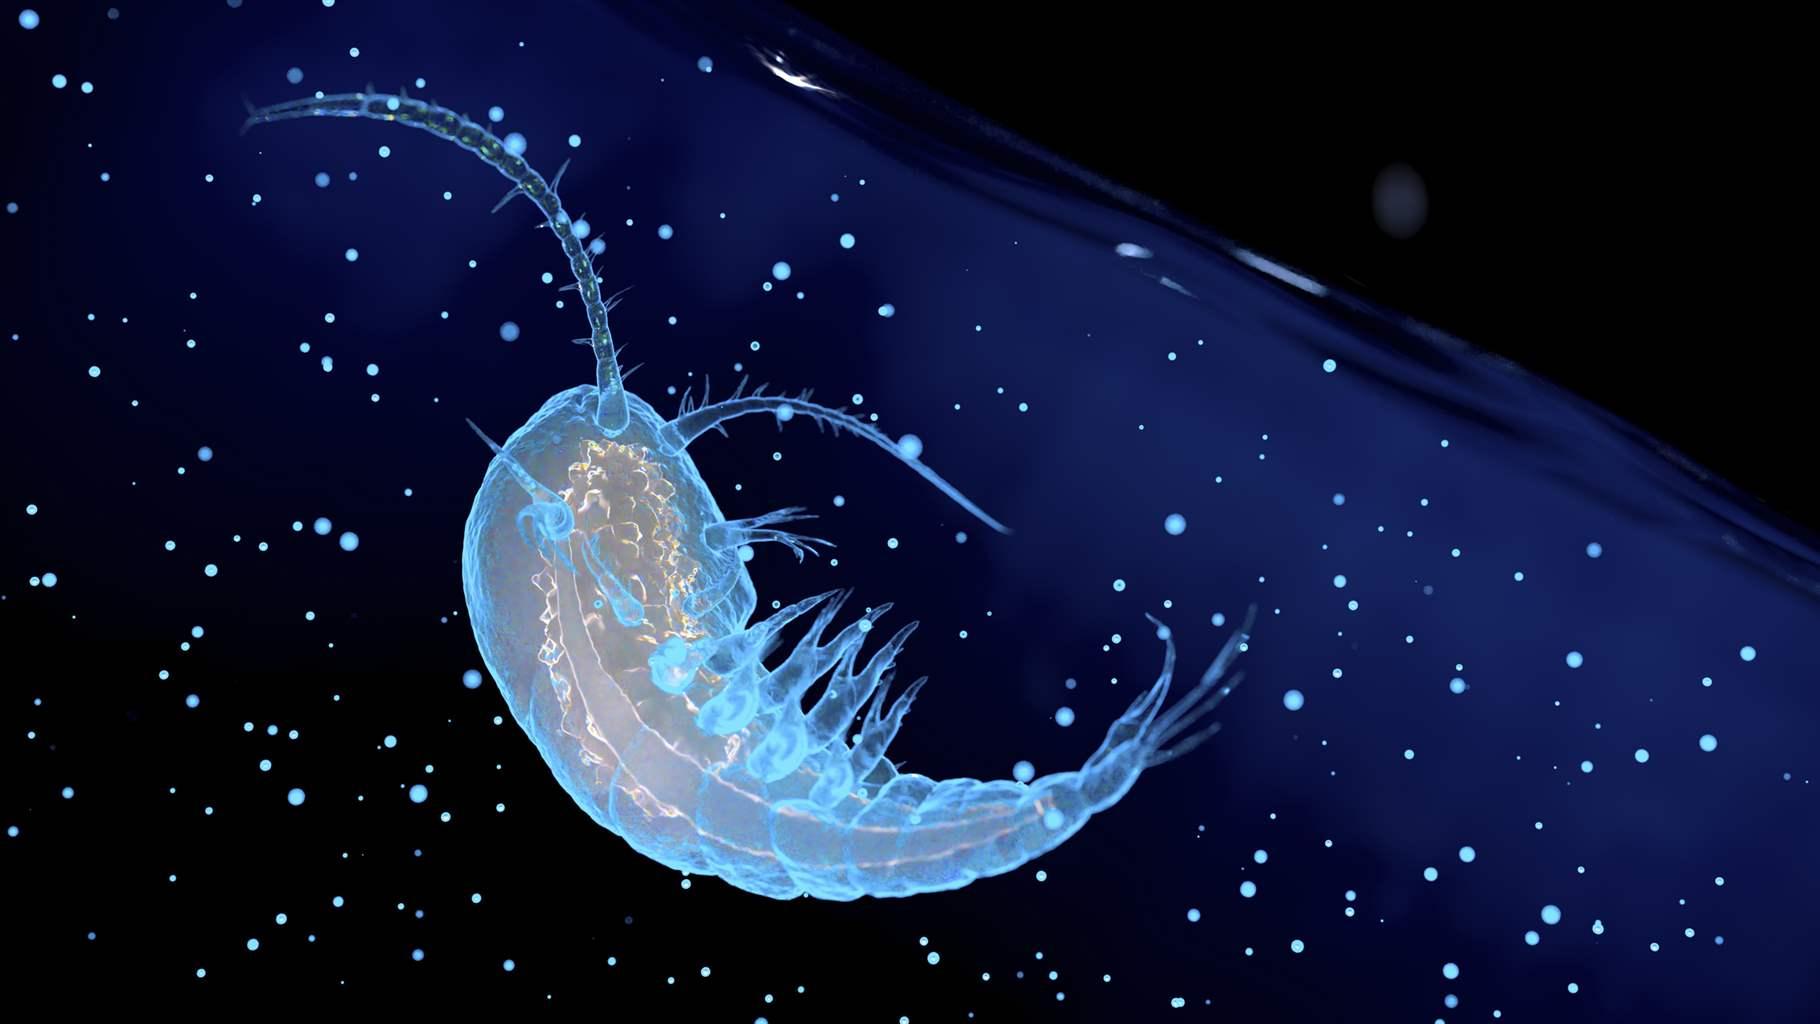 Computer illustration of a zooplankton.